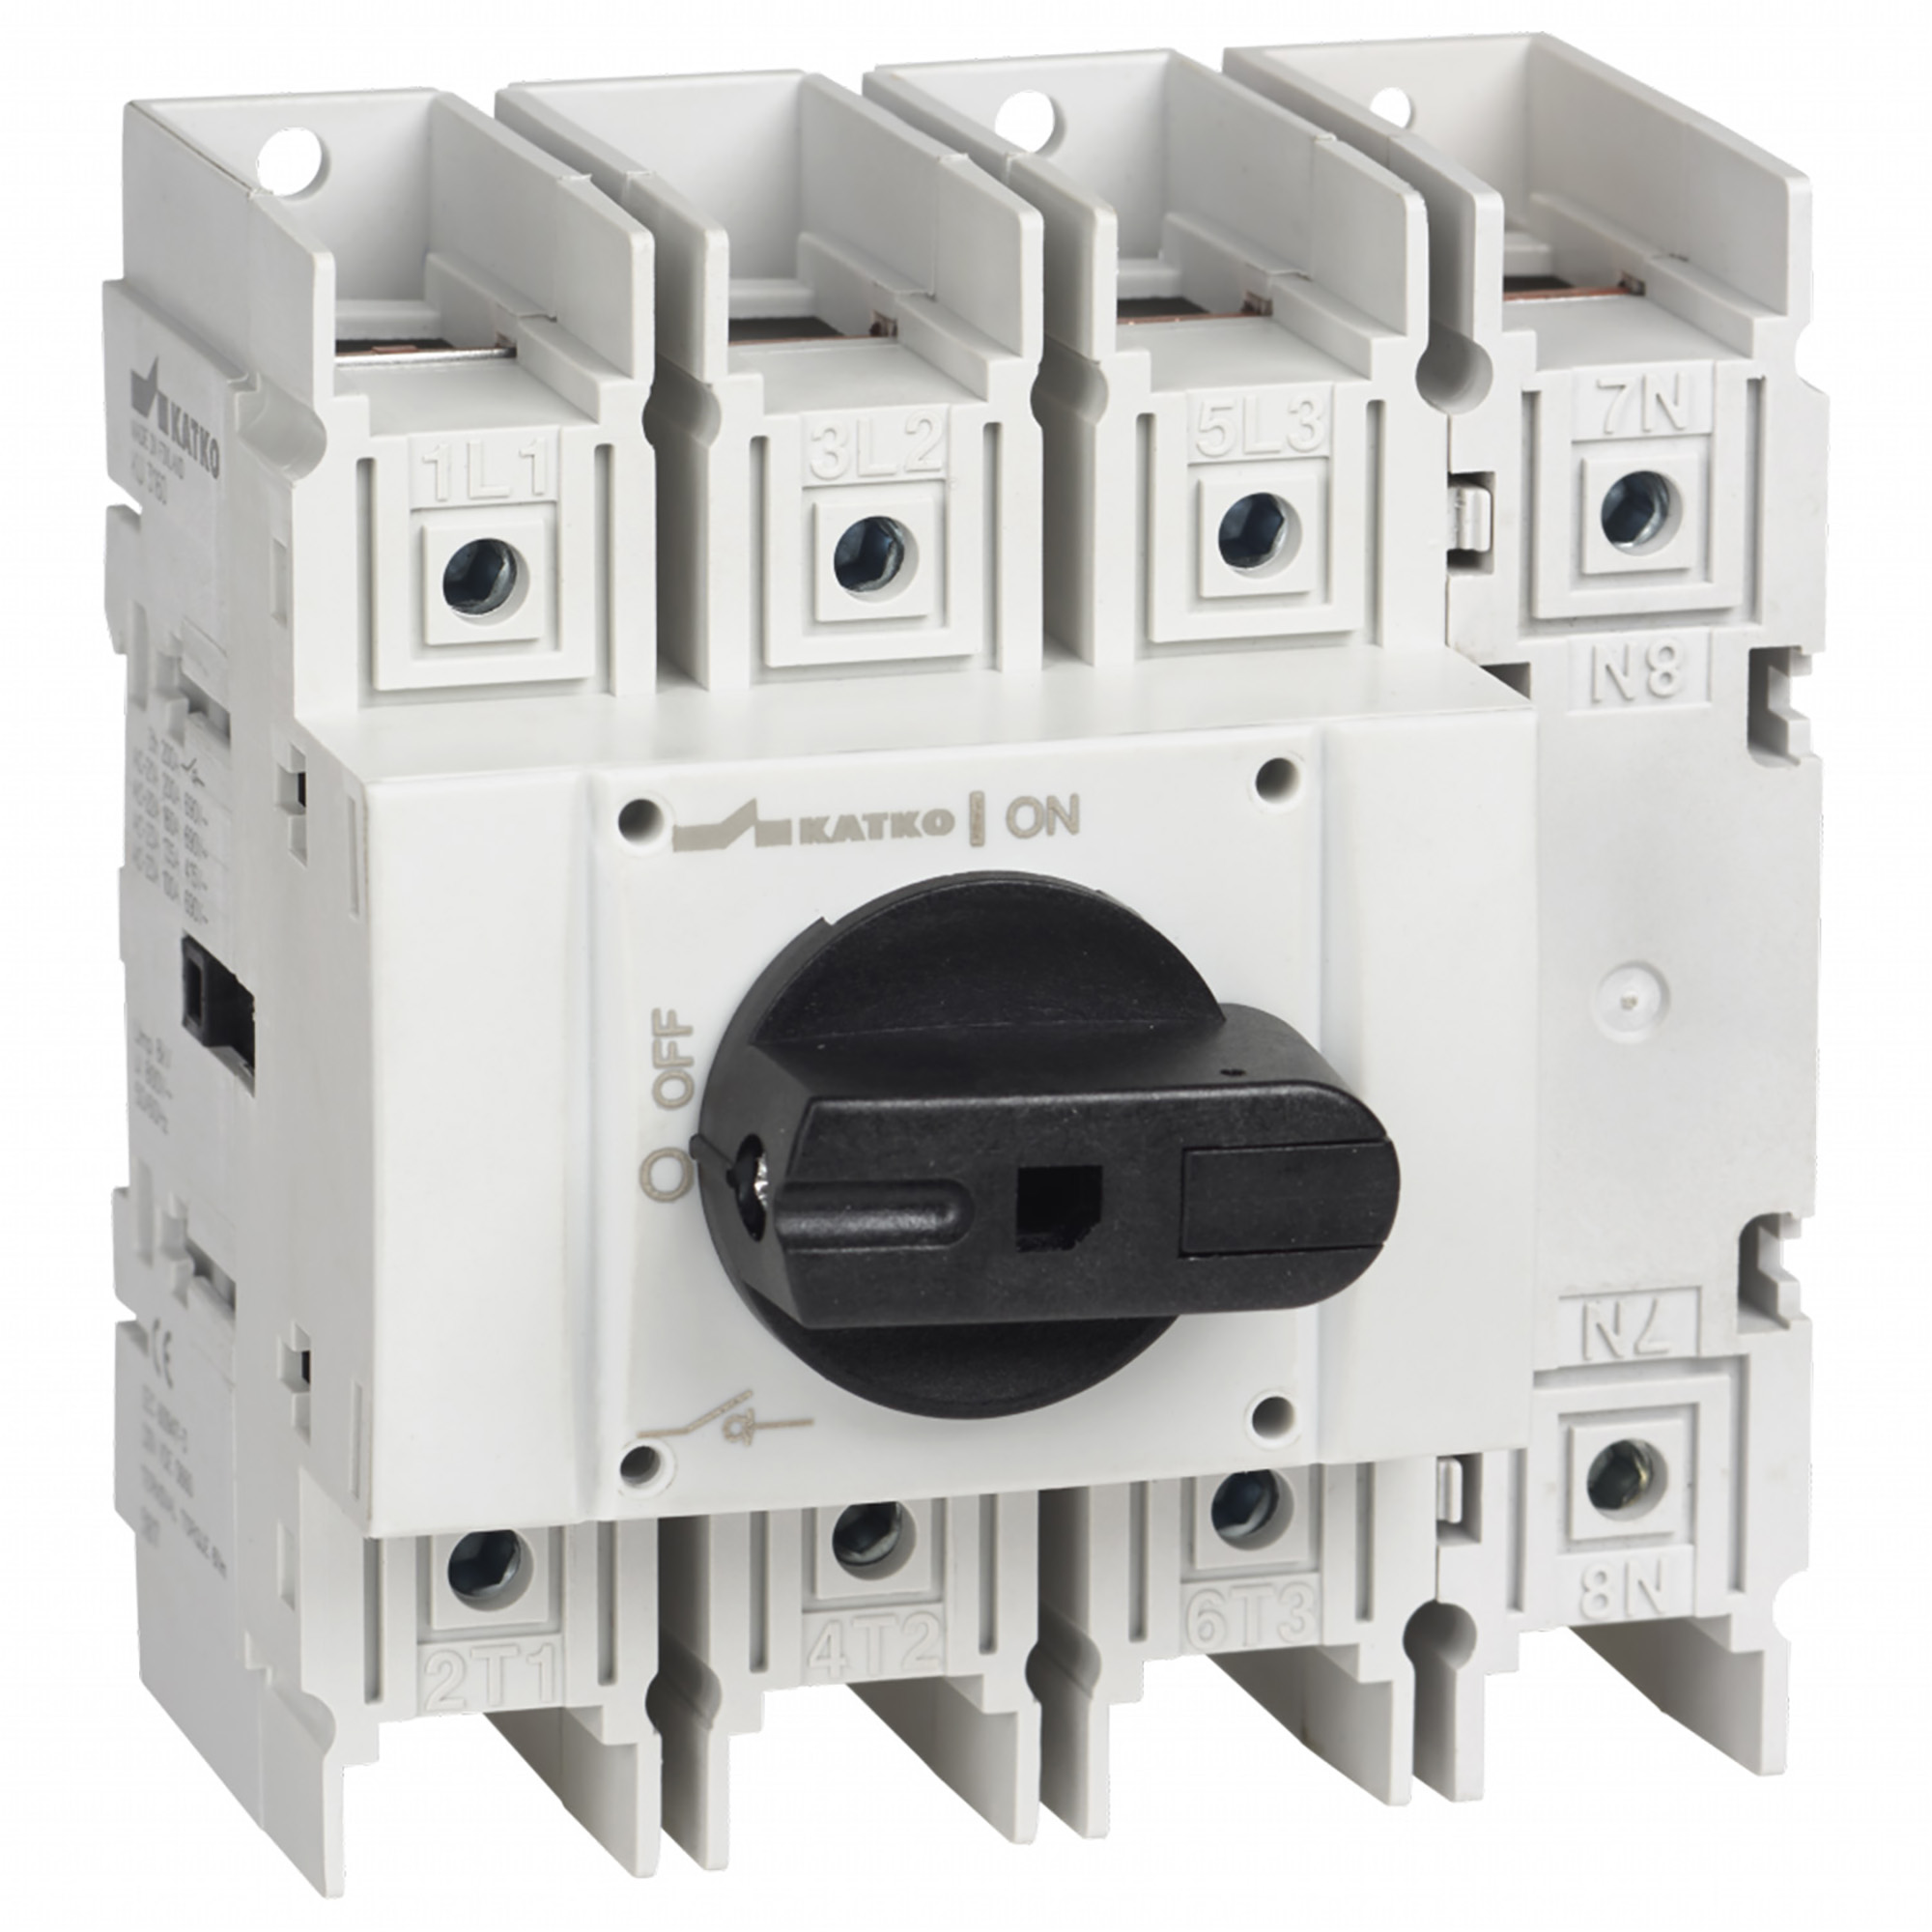 62-KU 4100 KU 16-160A 3- and 4-pole IN/OUT, compact, suitable for DIN-EN rail. The 4-pole version is also available with early-make and late-break neutral pole. The silver contactsensures safe and durable operation. Series KU modular design.